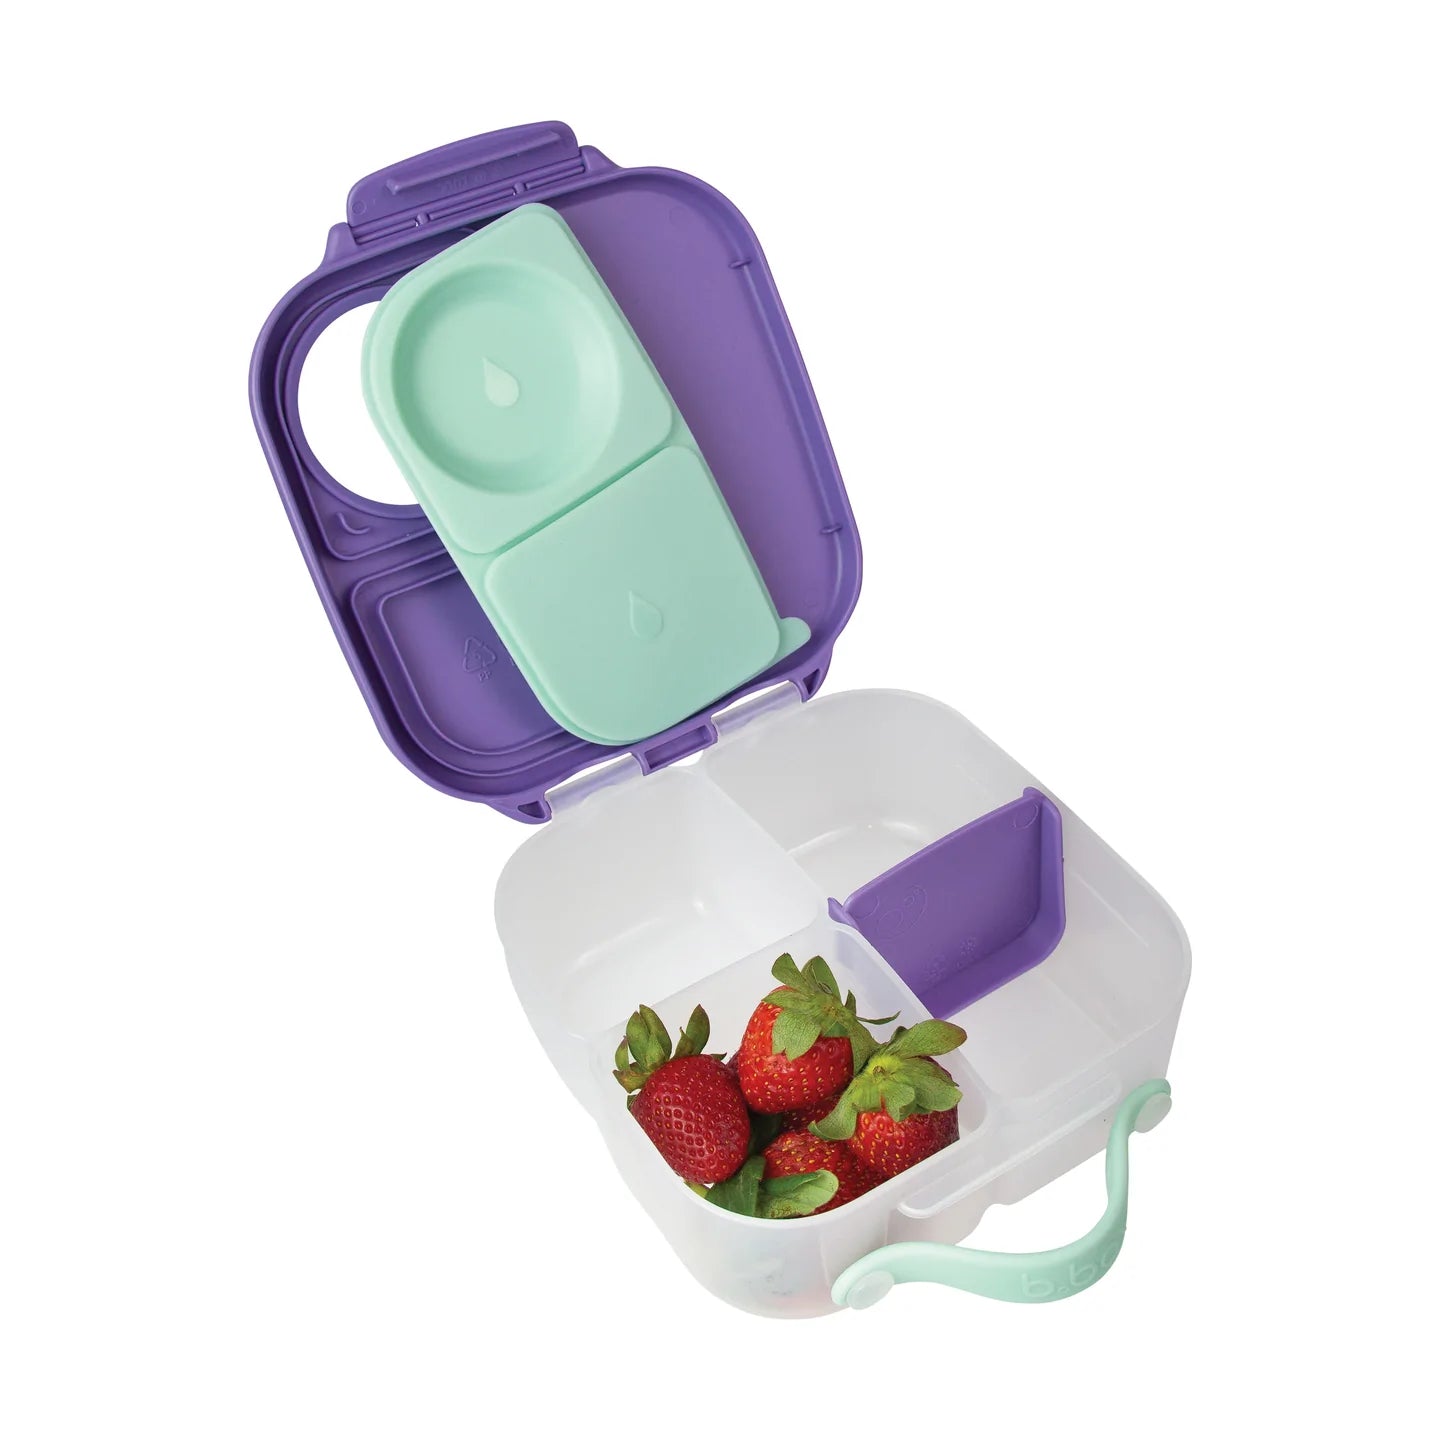 Bbox bento mini lunch box - angus and dudley 